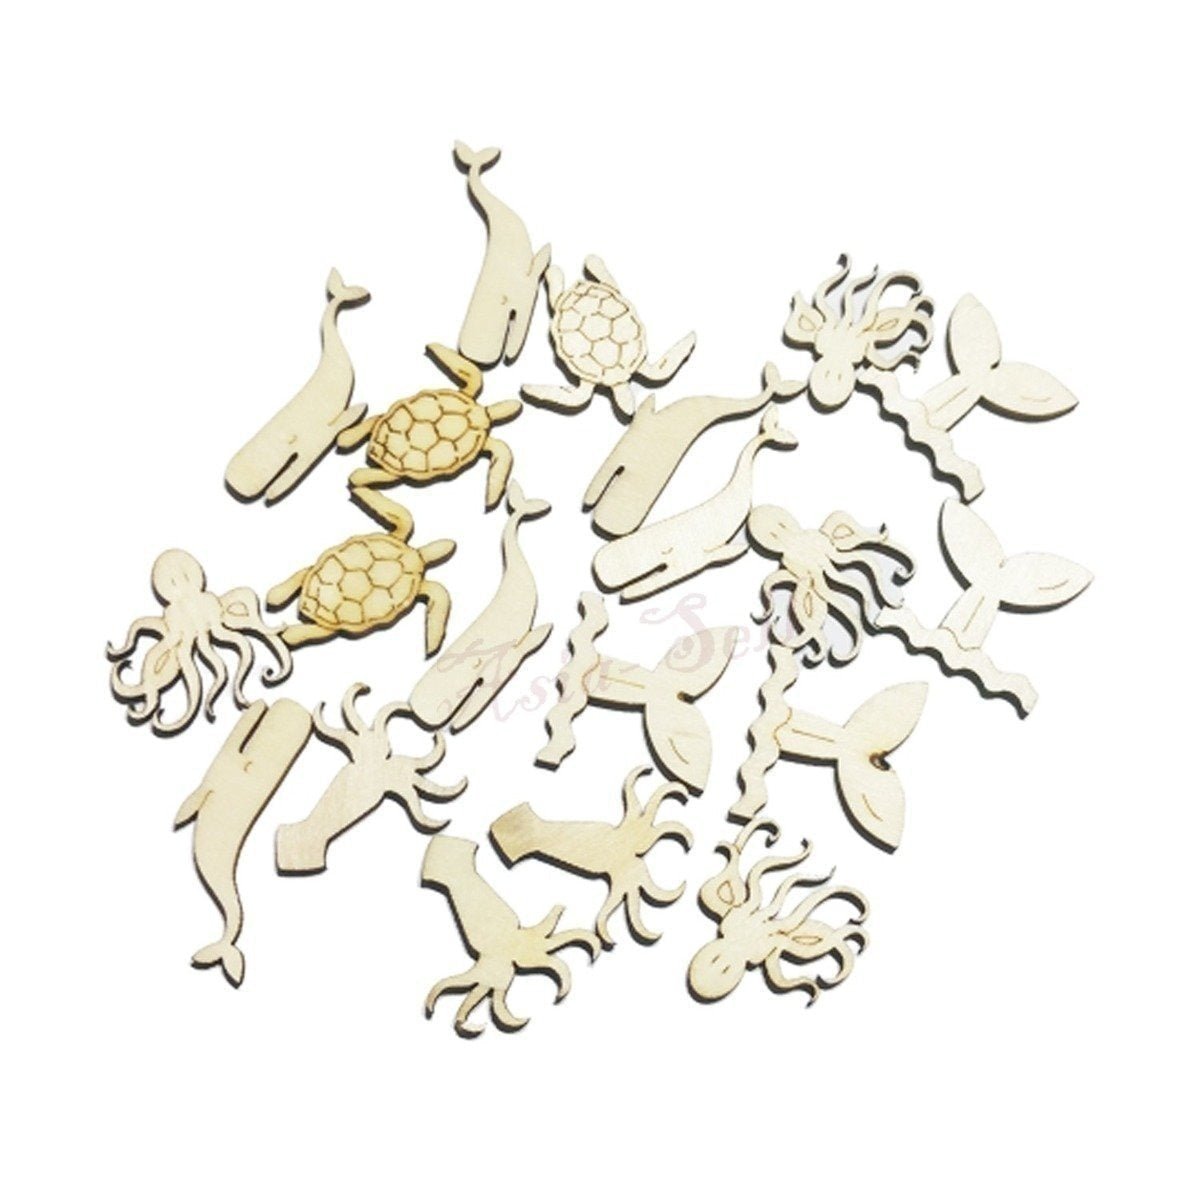 17-45mm Higher Order Sea Creatures Animals Wooden DIY Craft Wood Scrapbooking - - Asia Sell